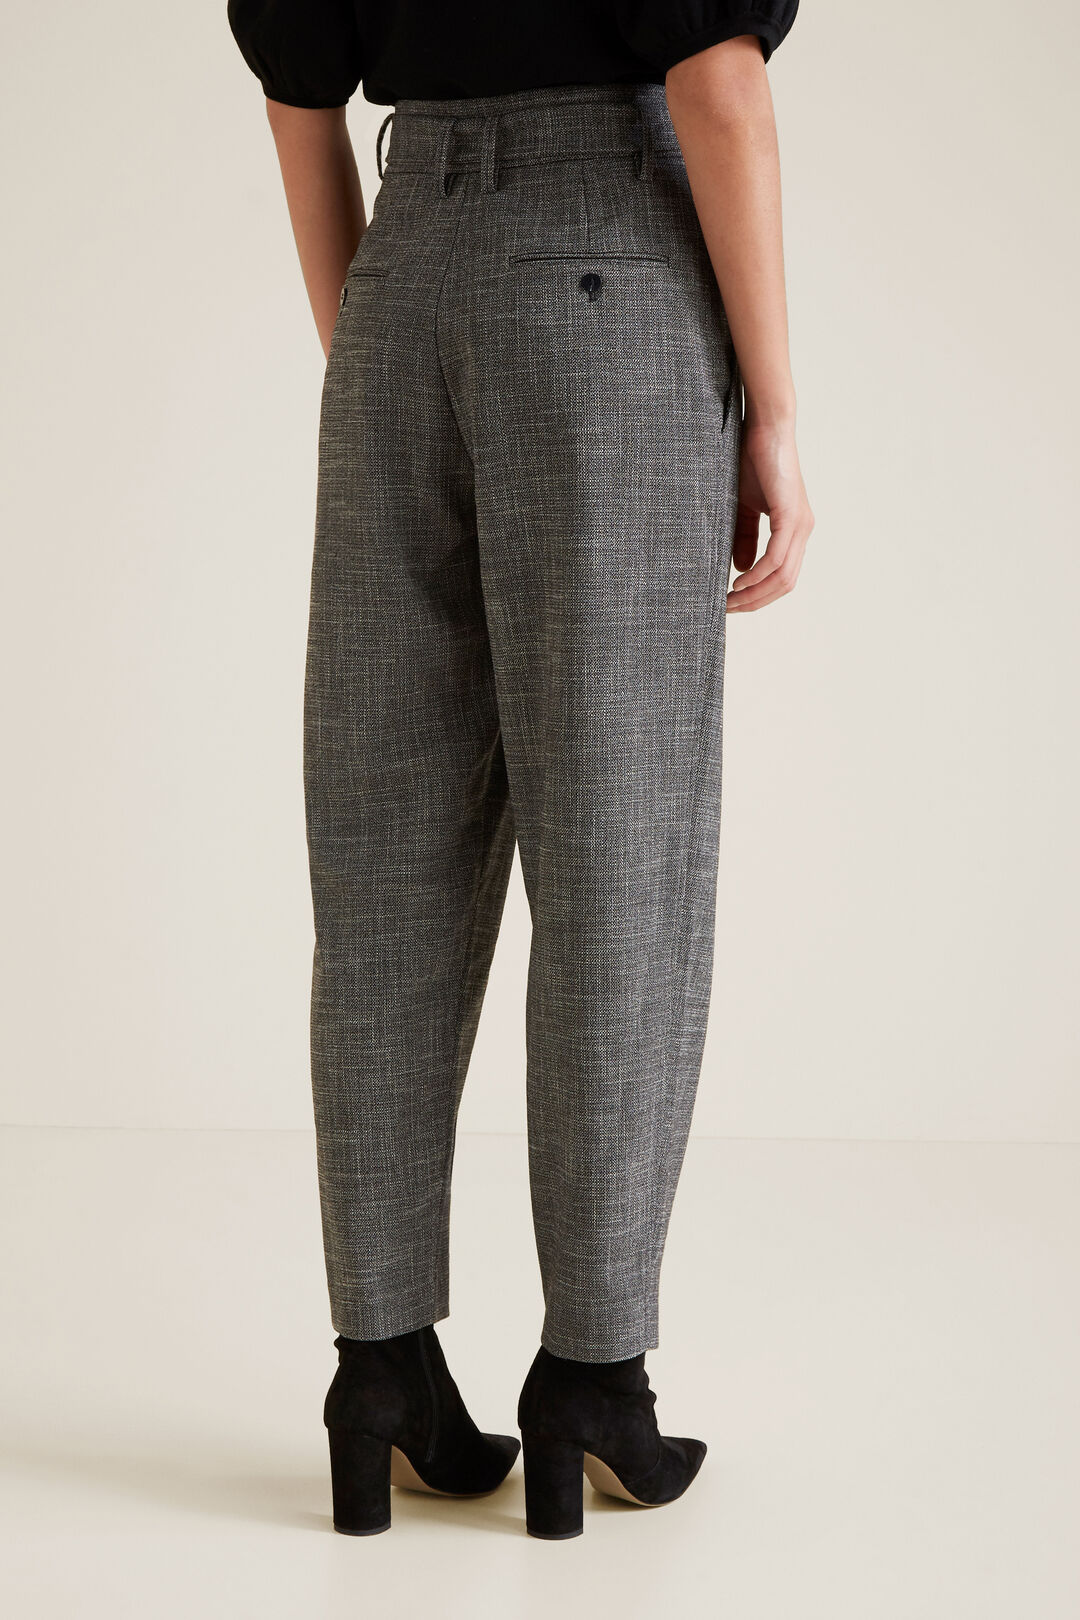 Textured Trousers | Seed Heritage